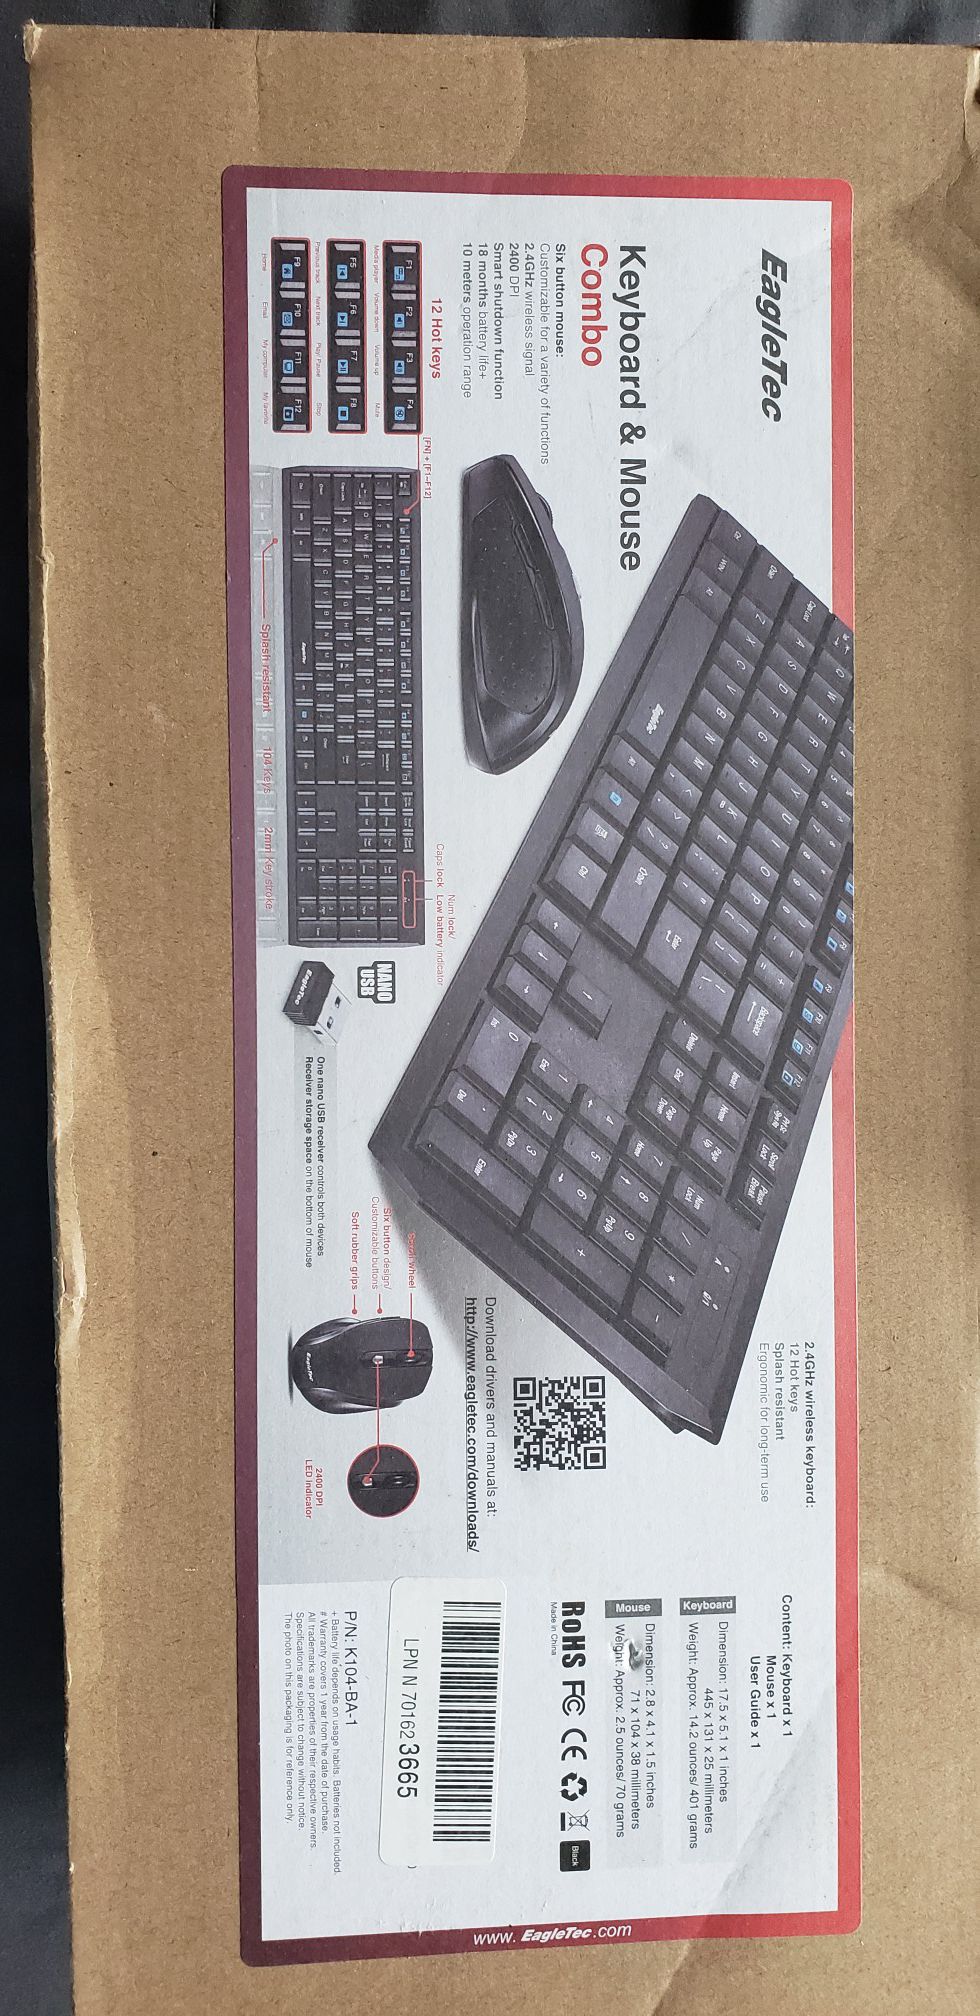 EagleTec wireless keyboard and mouse